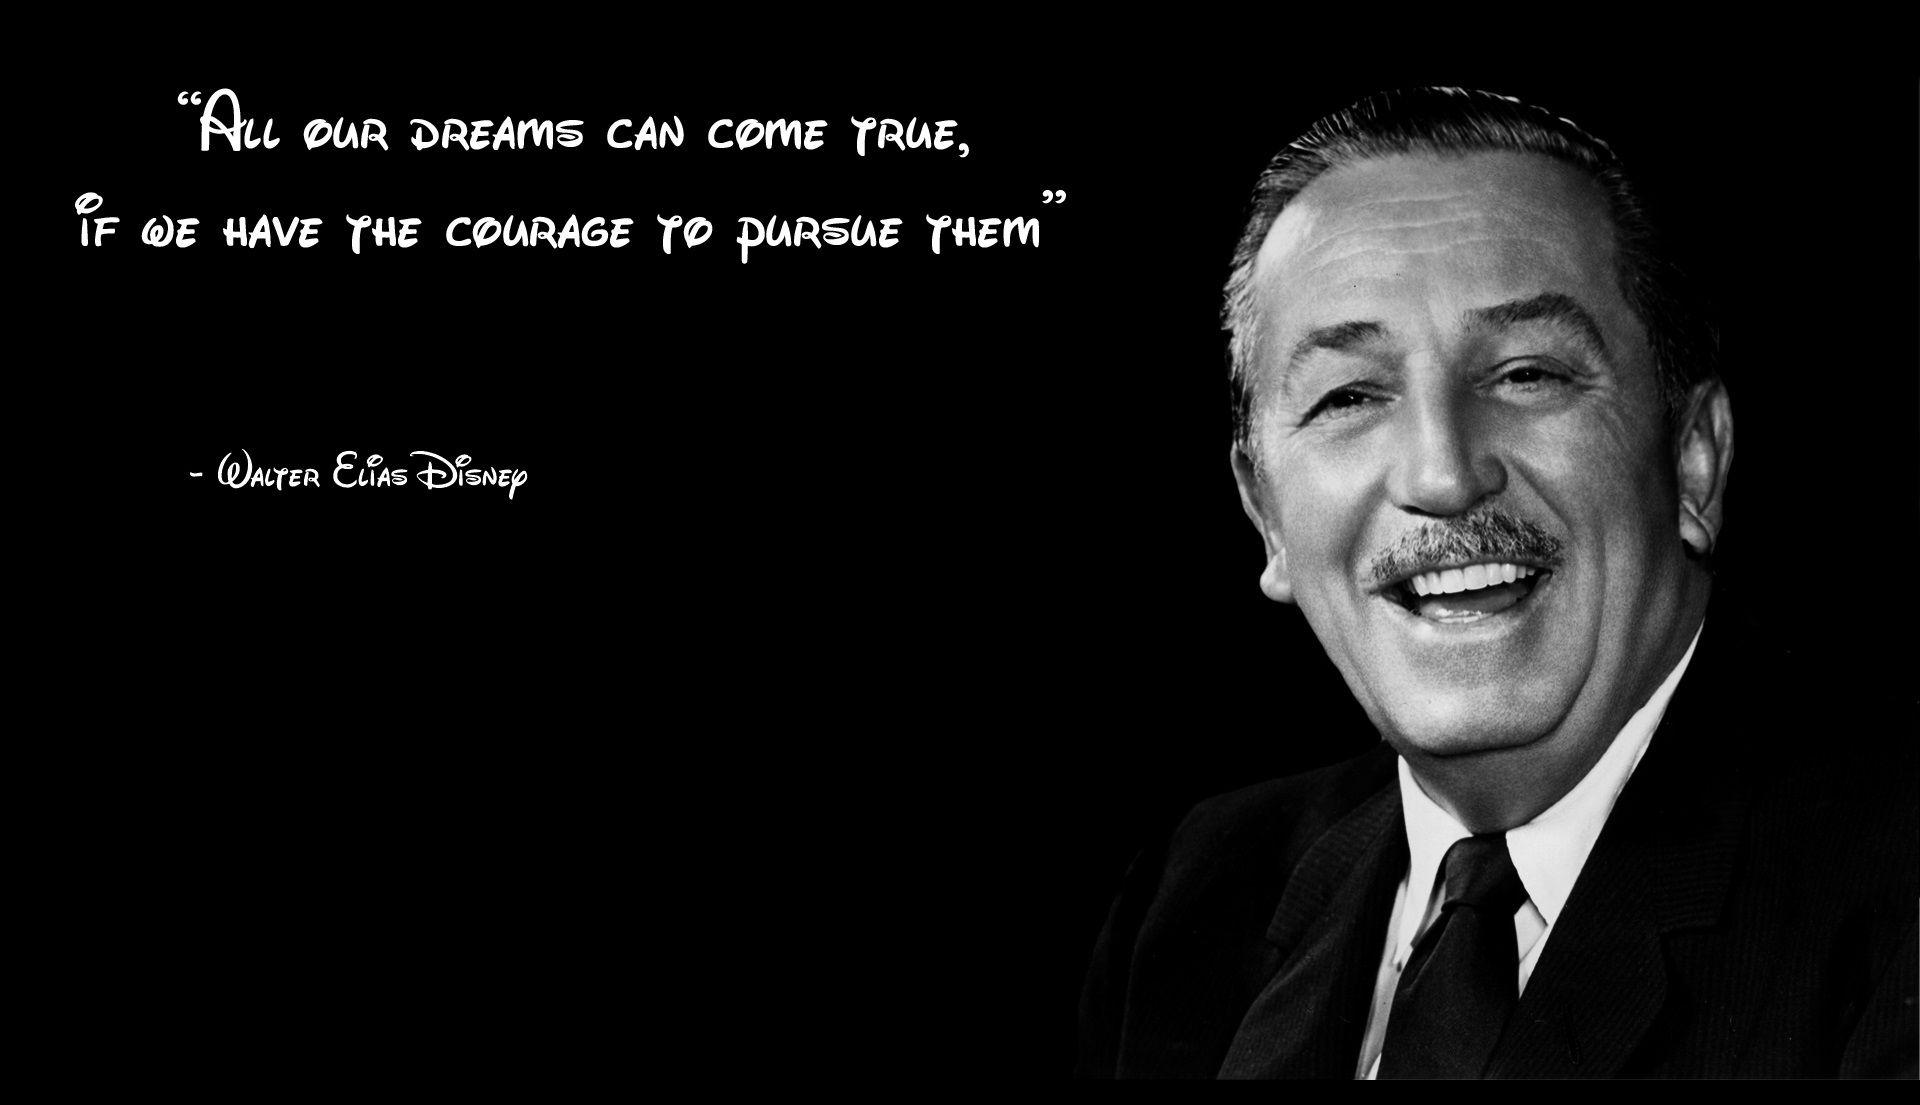 Arvinds Famous People Quotes Wallpaper. HD Wallpaper